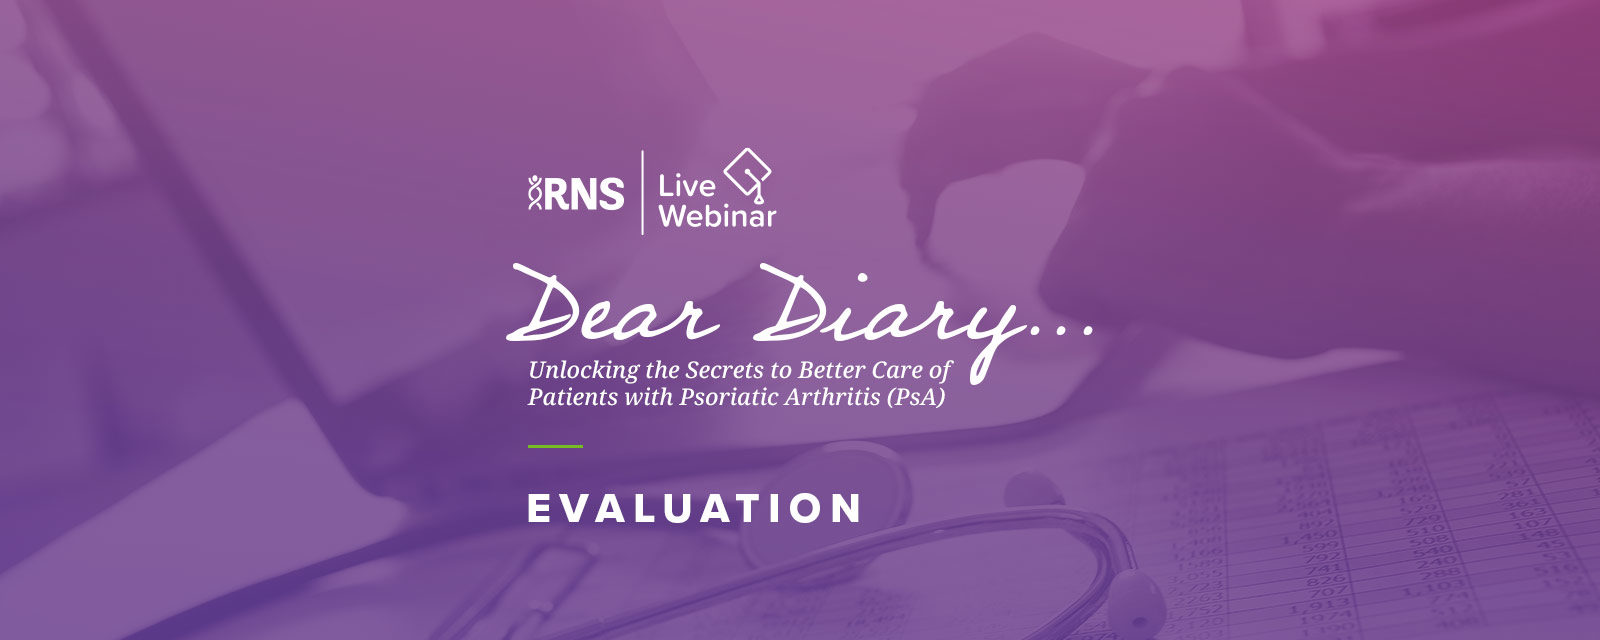 Dear Diary Webinar Series: Unlocking the Secrets to Better Care of Patients with Psoriatic Arthritis